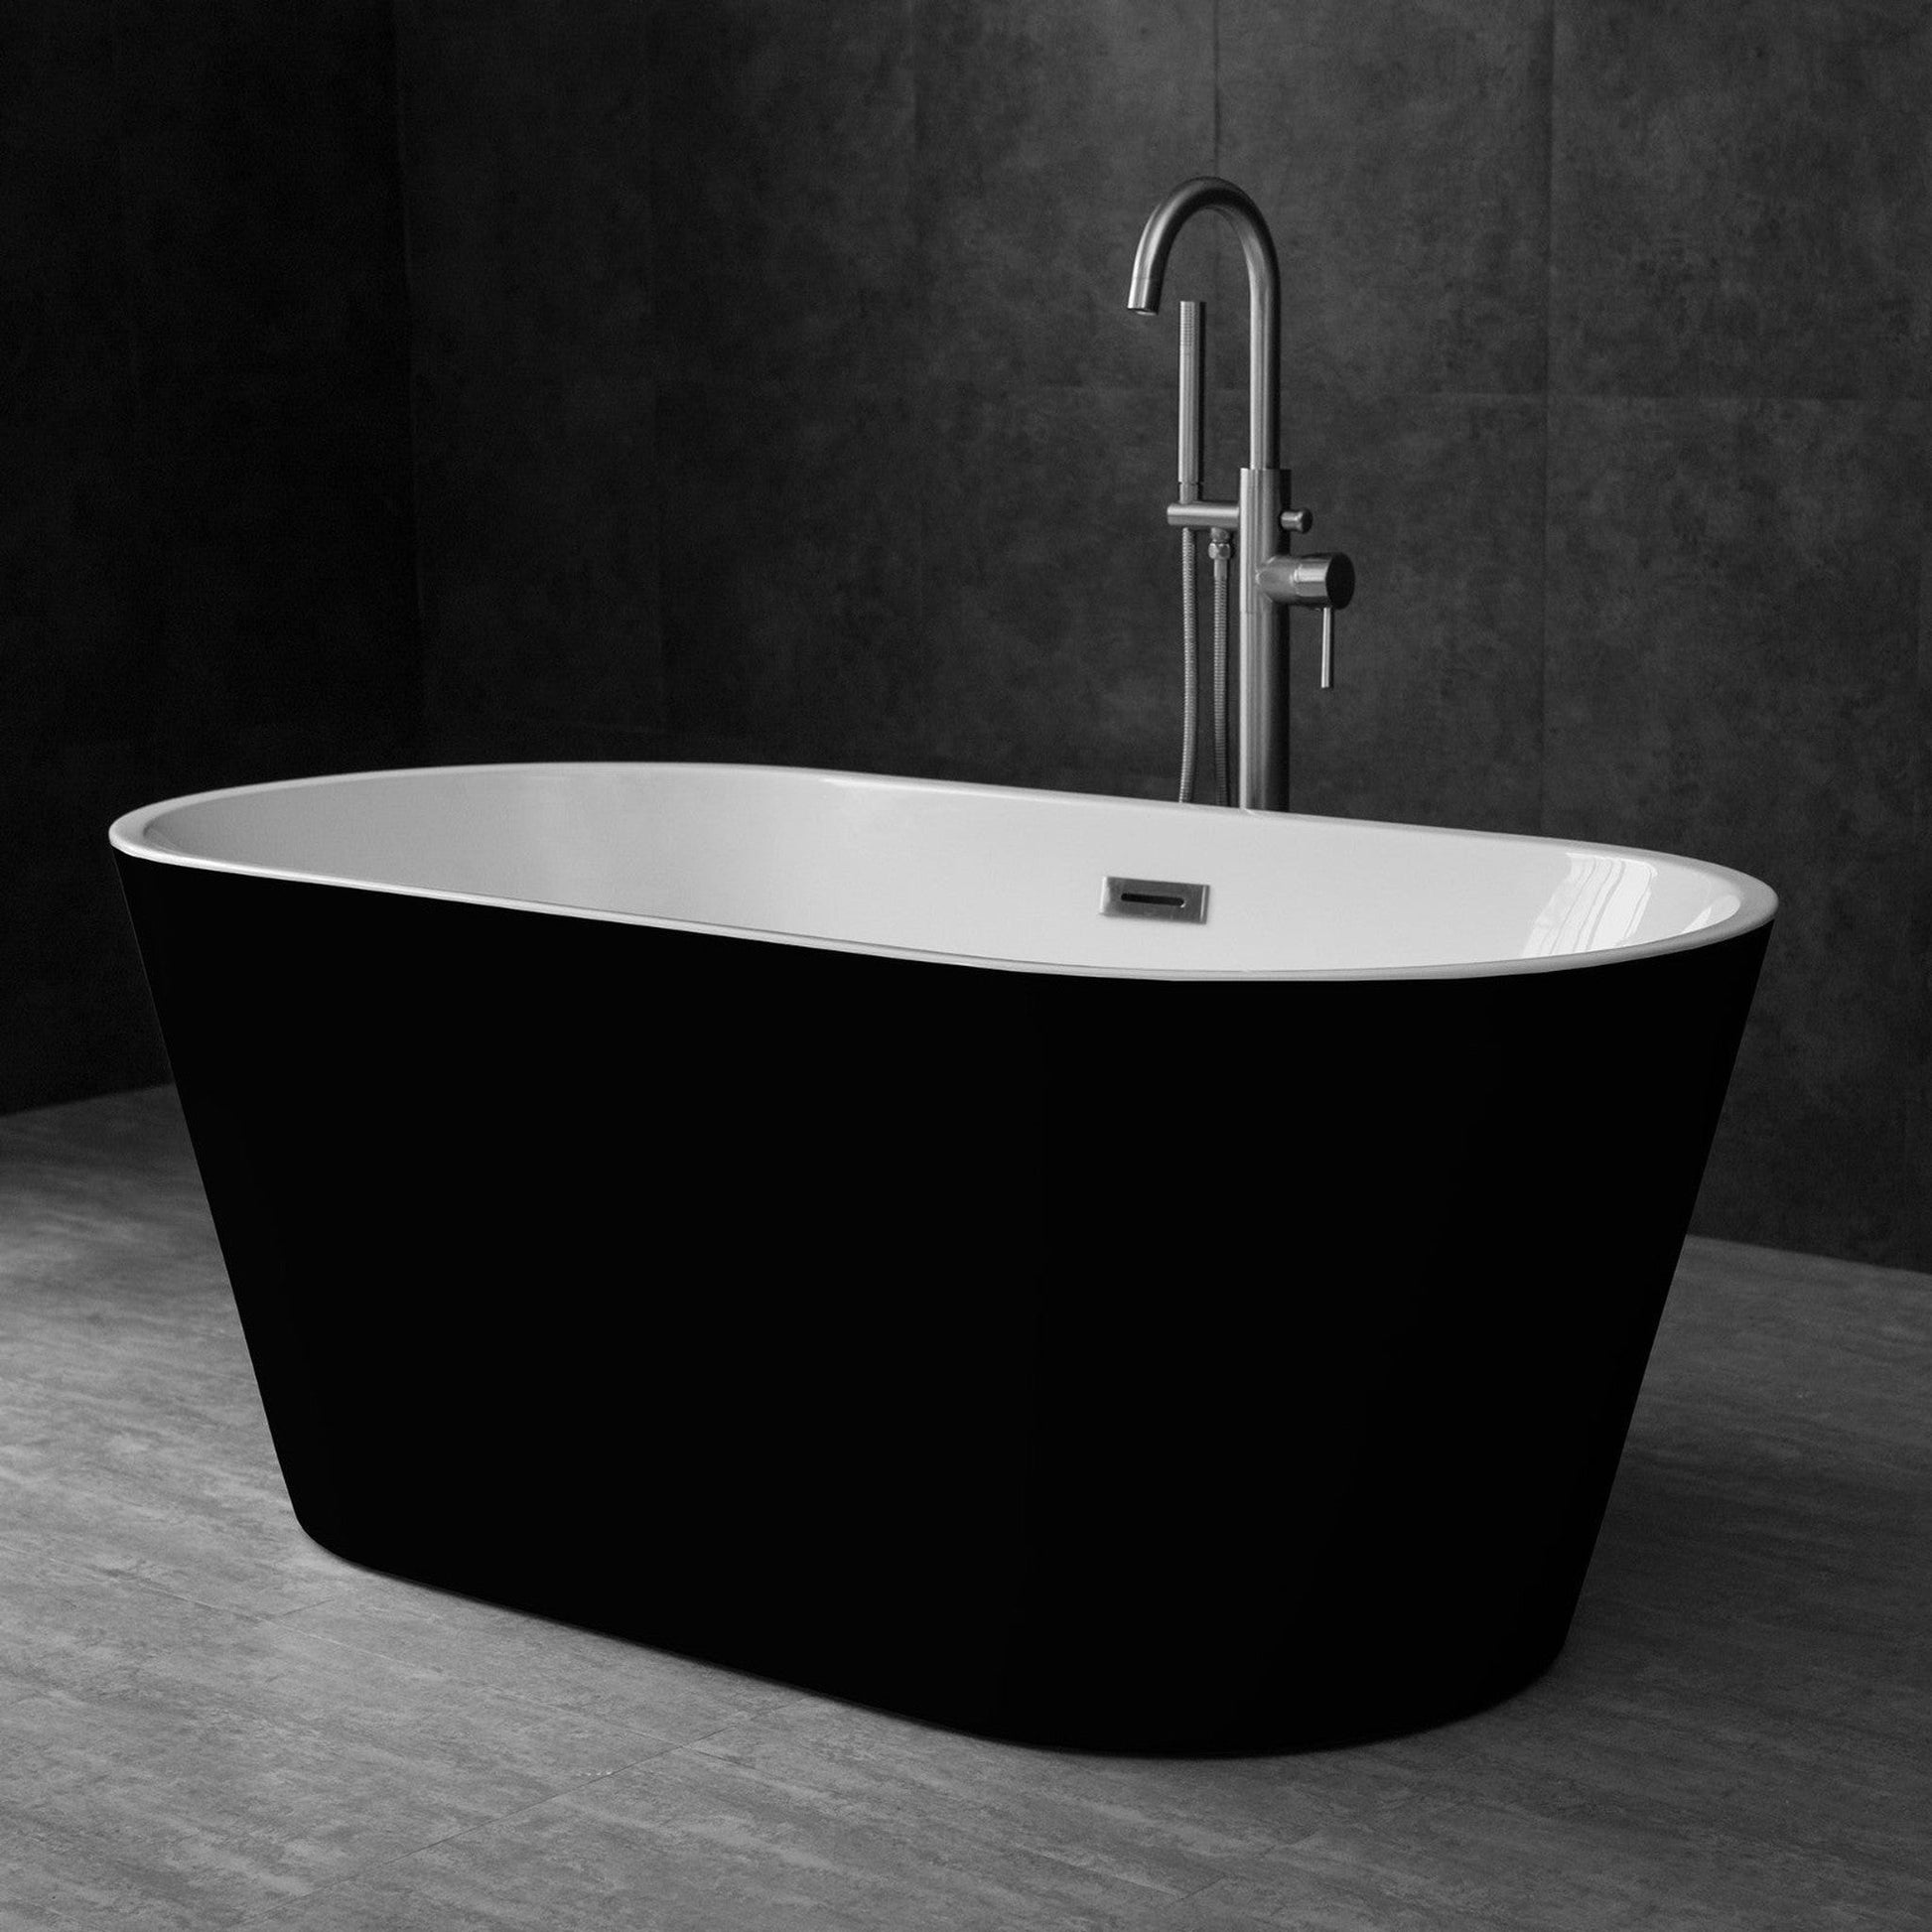 WoodBridge 59" Black Acrylic Freestanding Contemporary Soaking Bathtub With Brushed Nickel Drain, Overflow, F-0014 Tub Filler and Caddy Tray